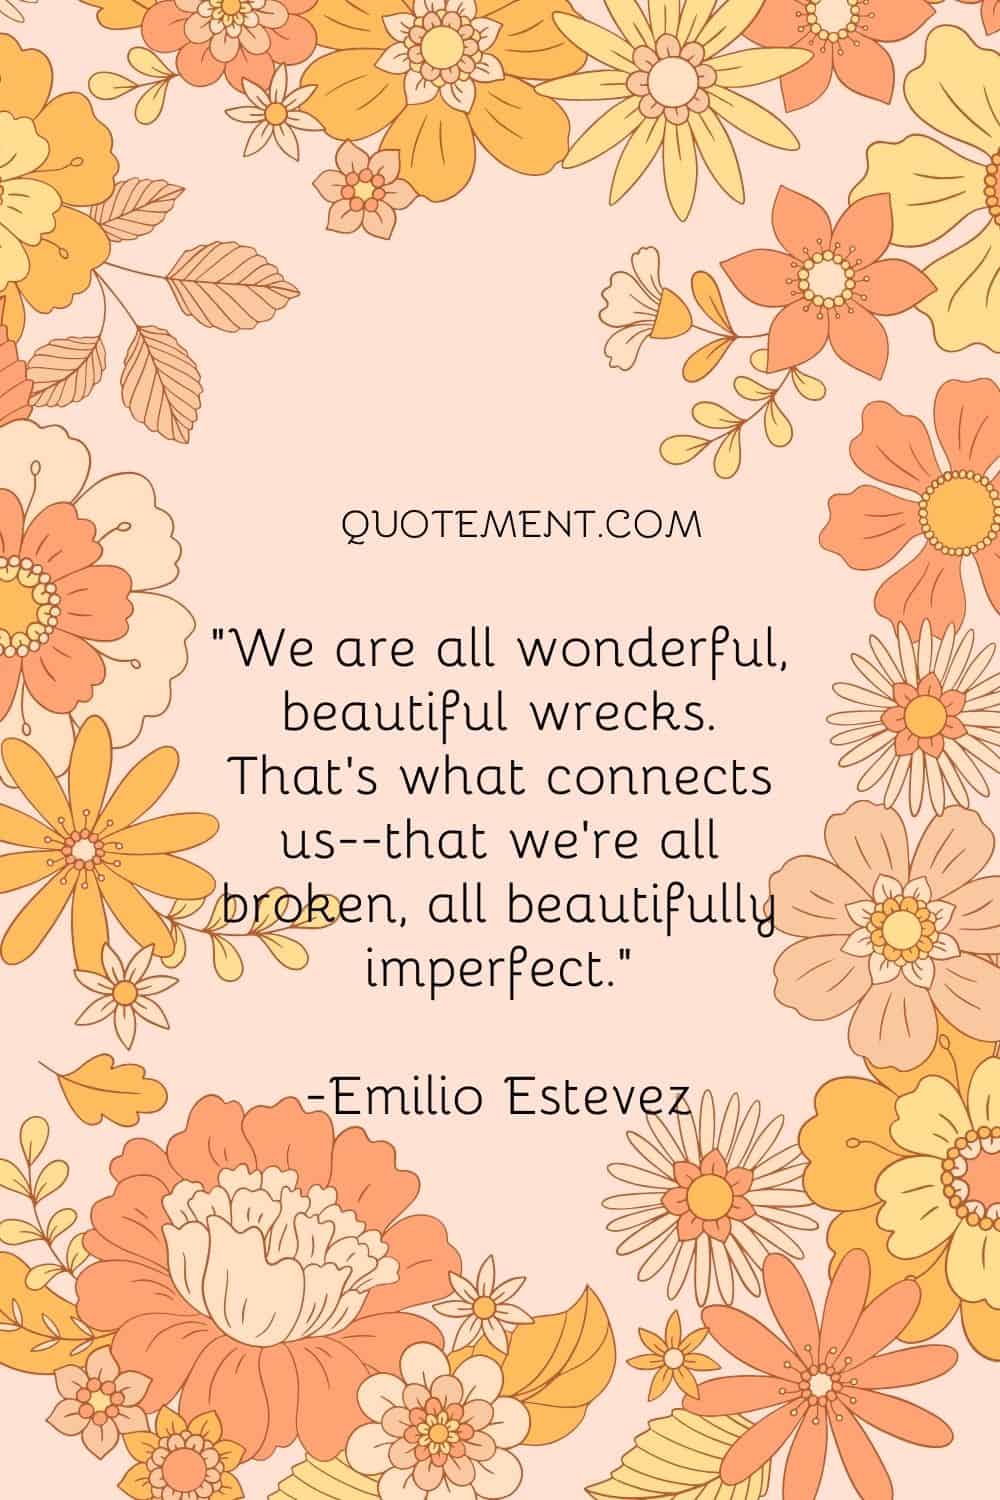 That's what connects us--that we're all broken, all beautifully imperfect.